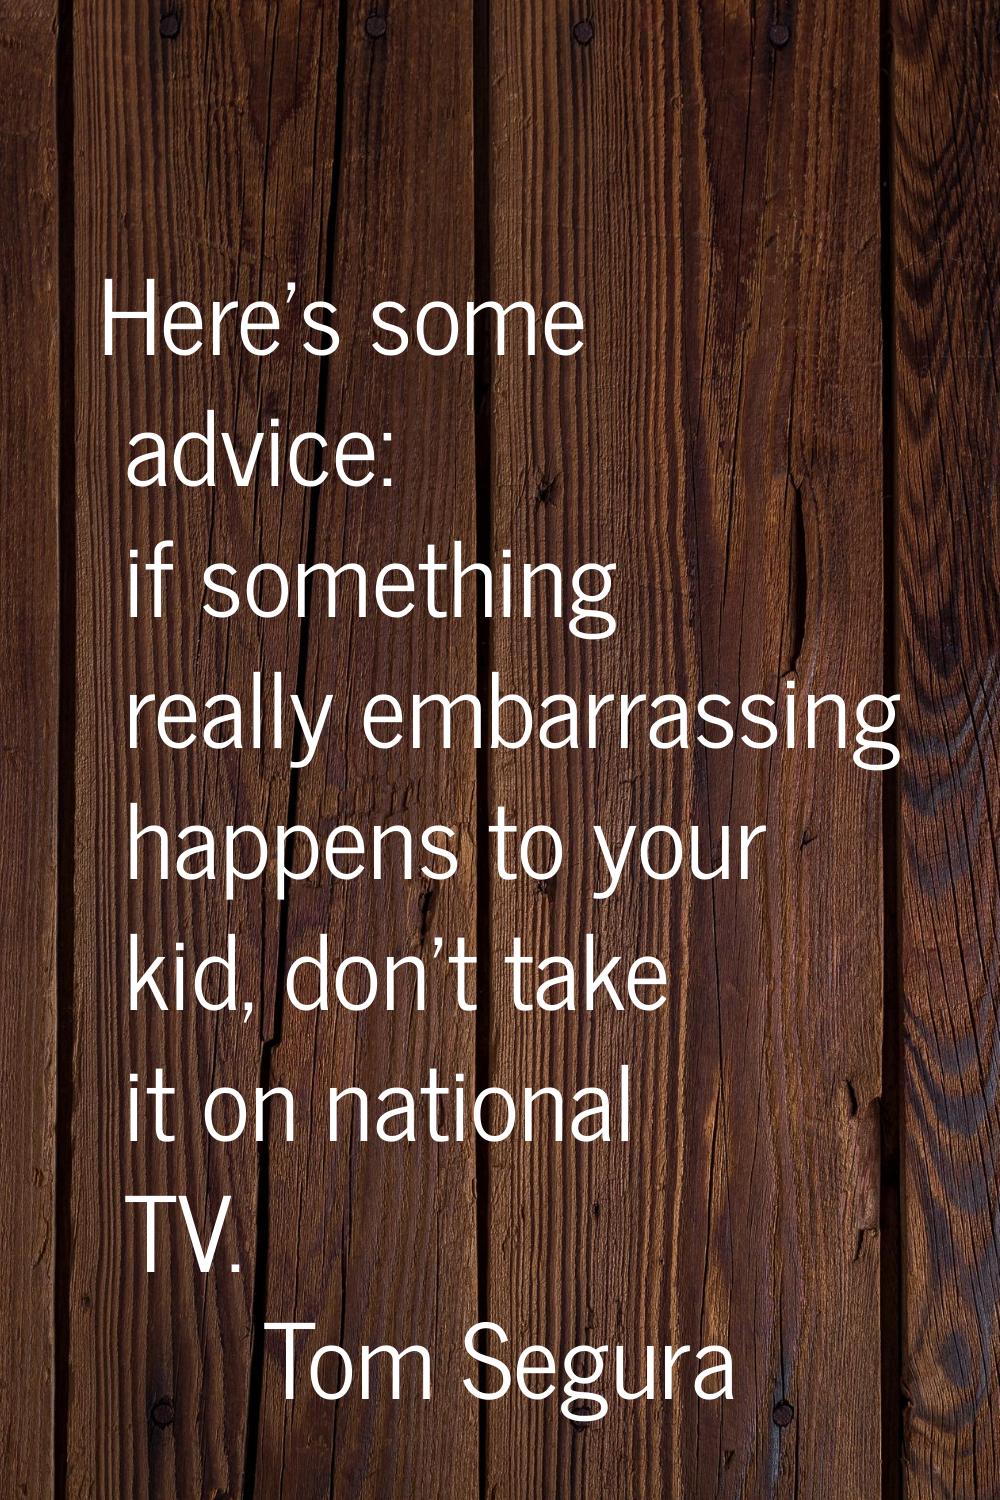 Here's some advice: if something really embarrassing happens to your kid, don't take it on national